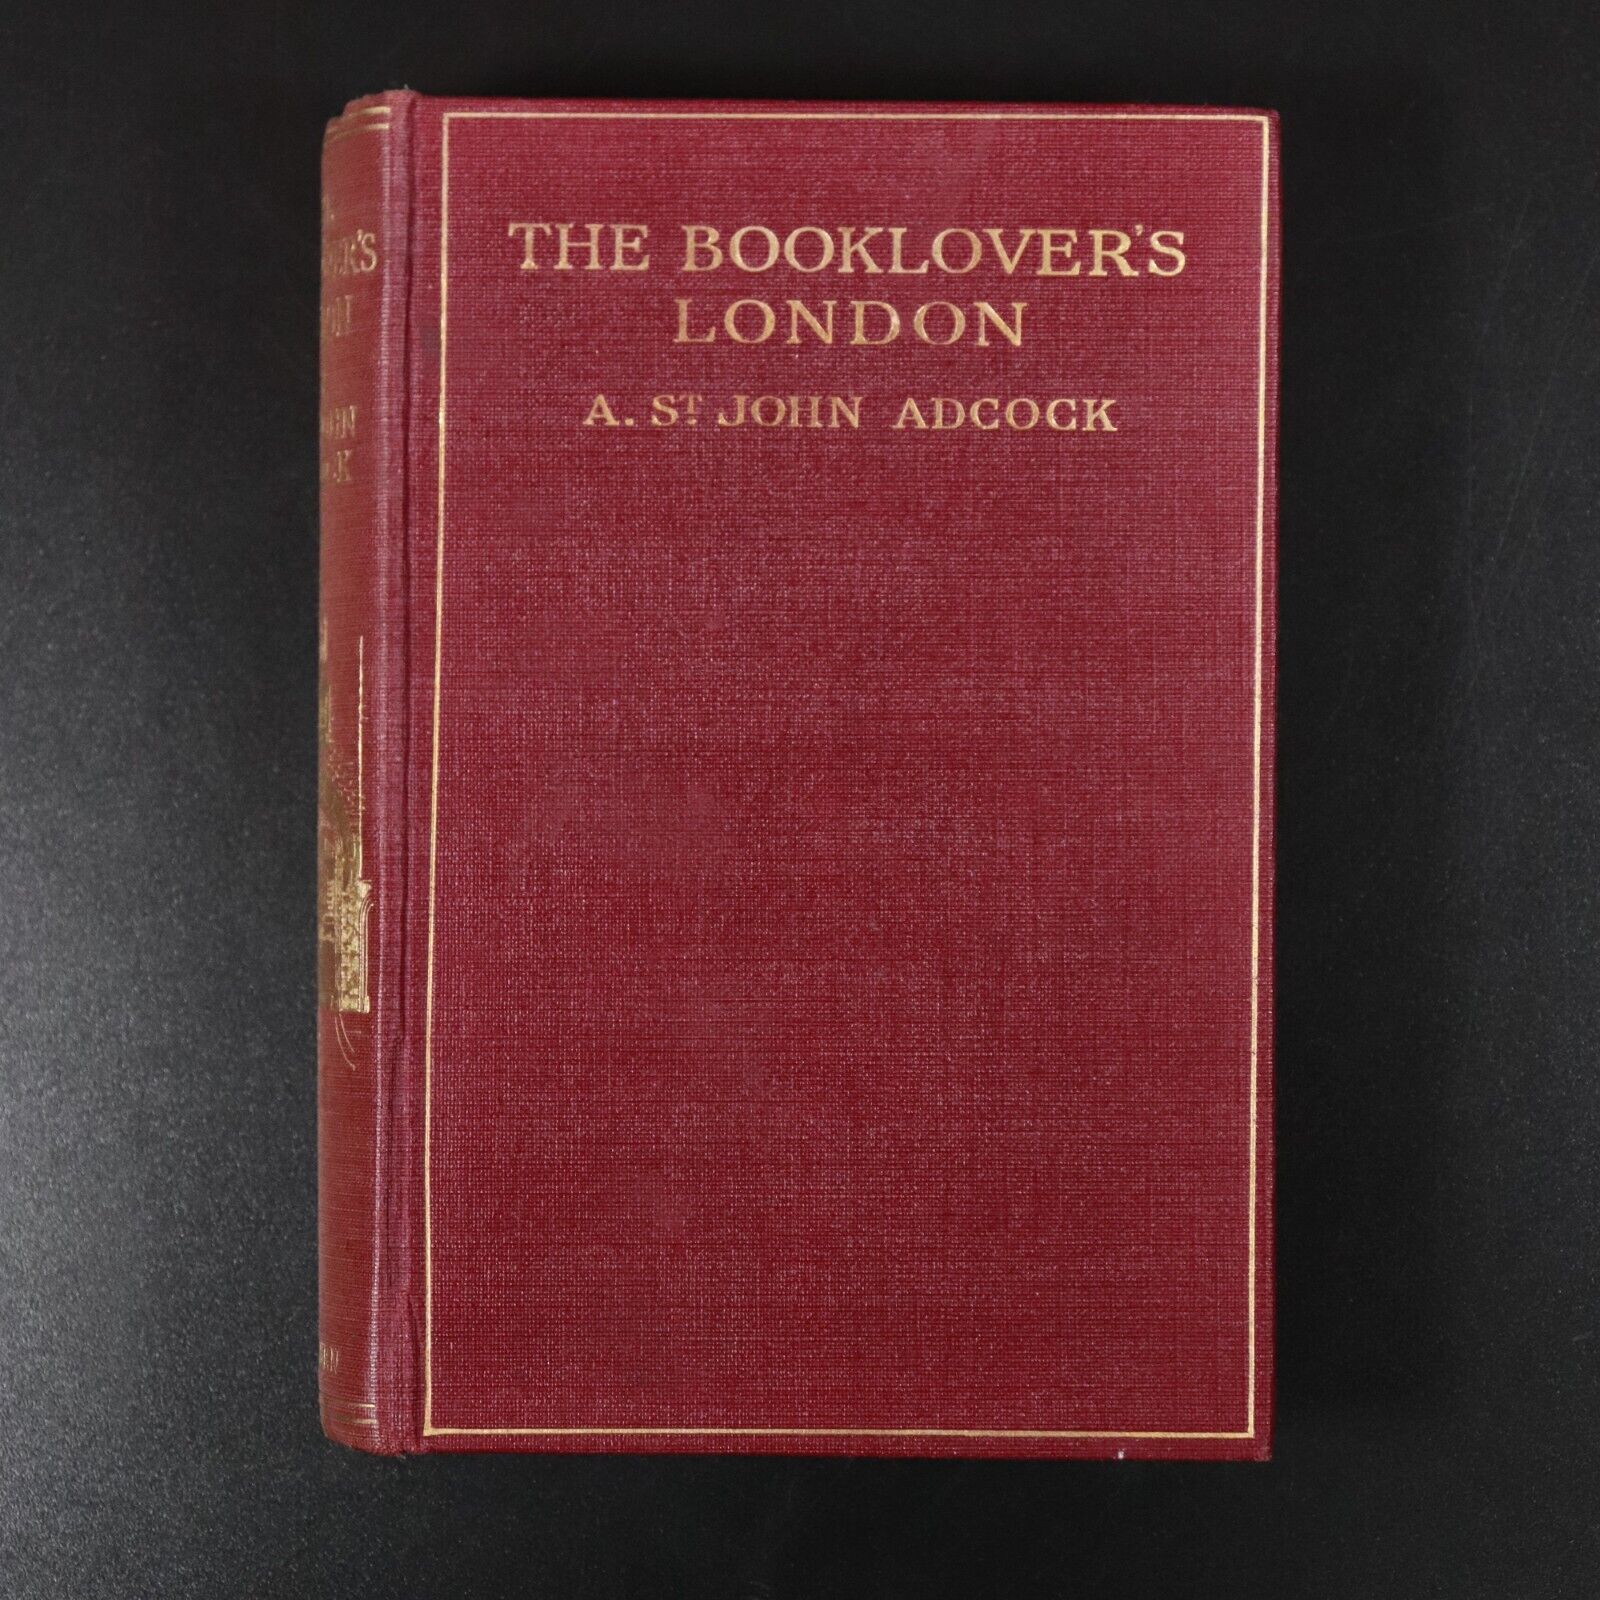 1913 The Booklovers London by A. St John Adcock Antique British History Book